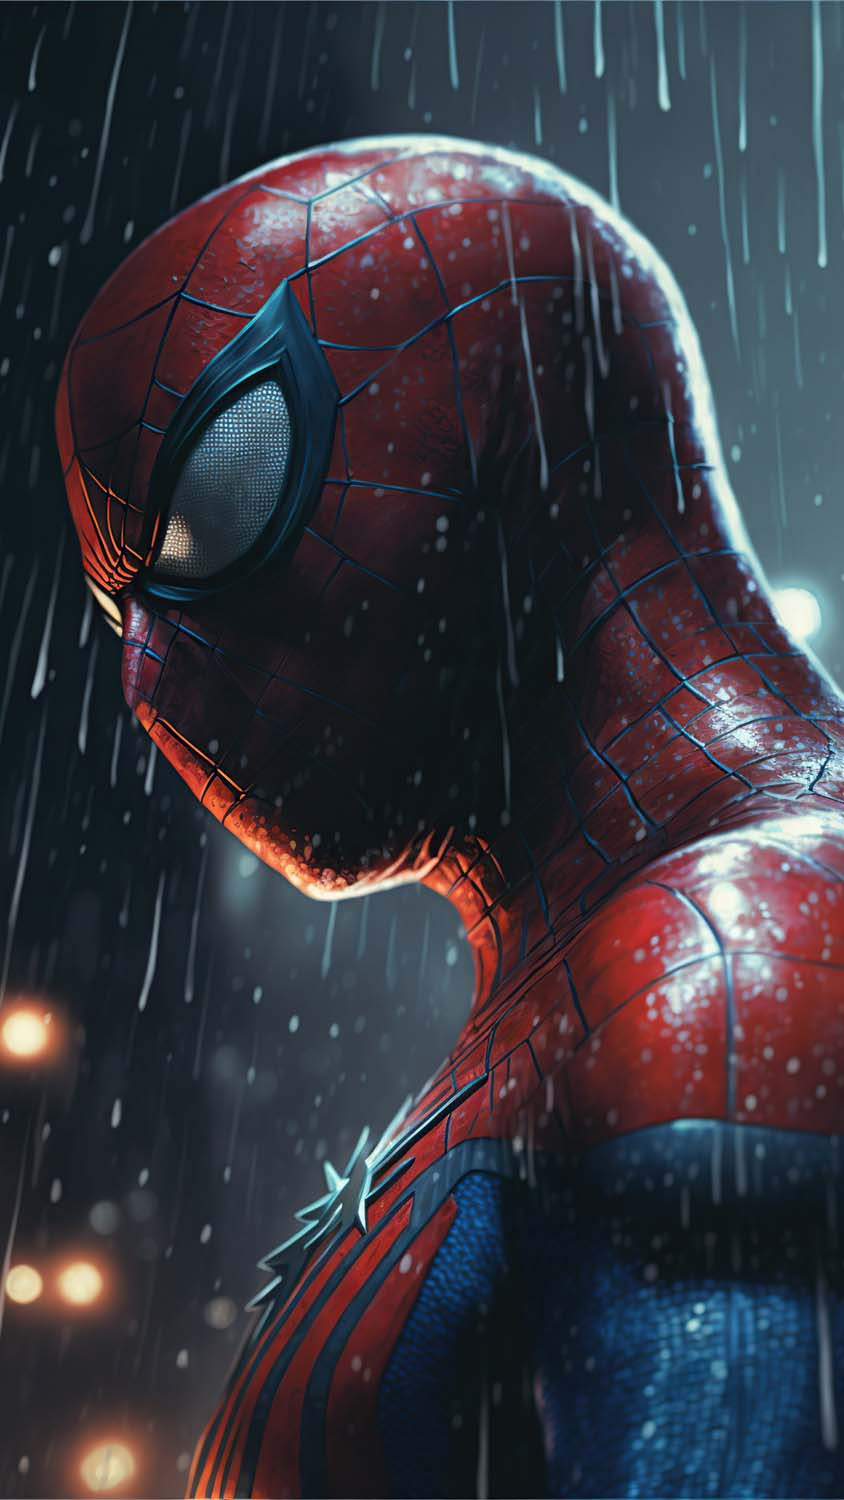 Spiderman Remastered IPhone Wallpaper  IPhone Wallpapers  iPhone  Wallpapers  Iphone wallpaper Spiderman Cool wallpapers for phones